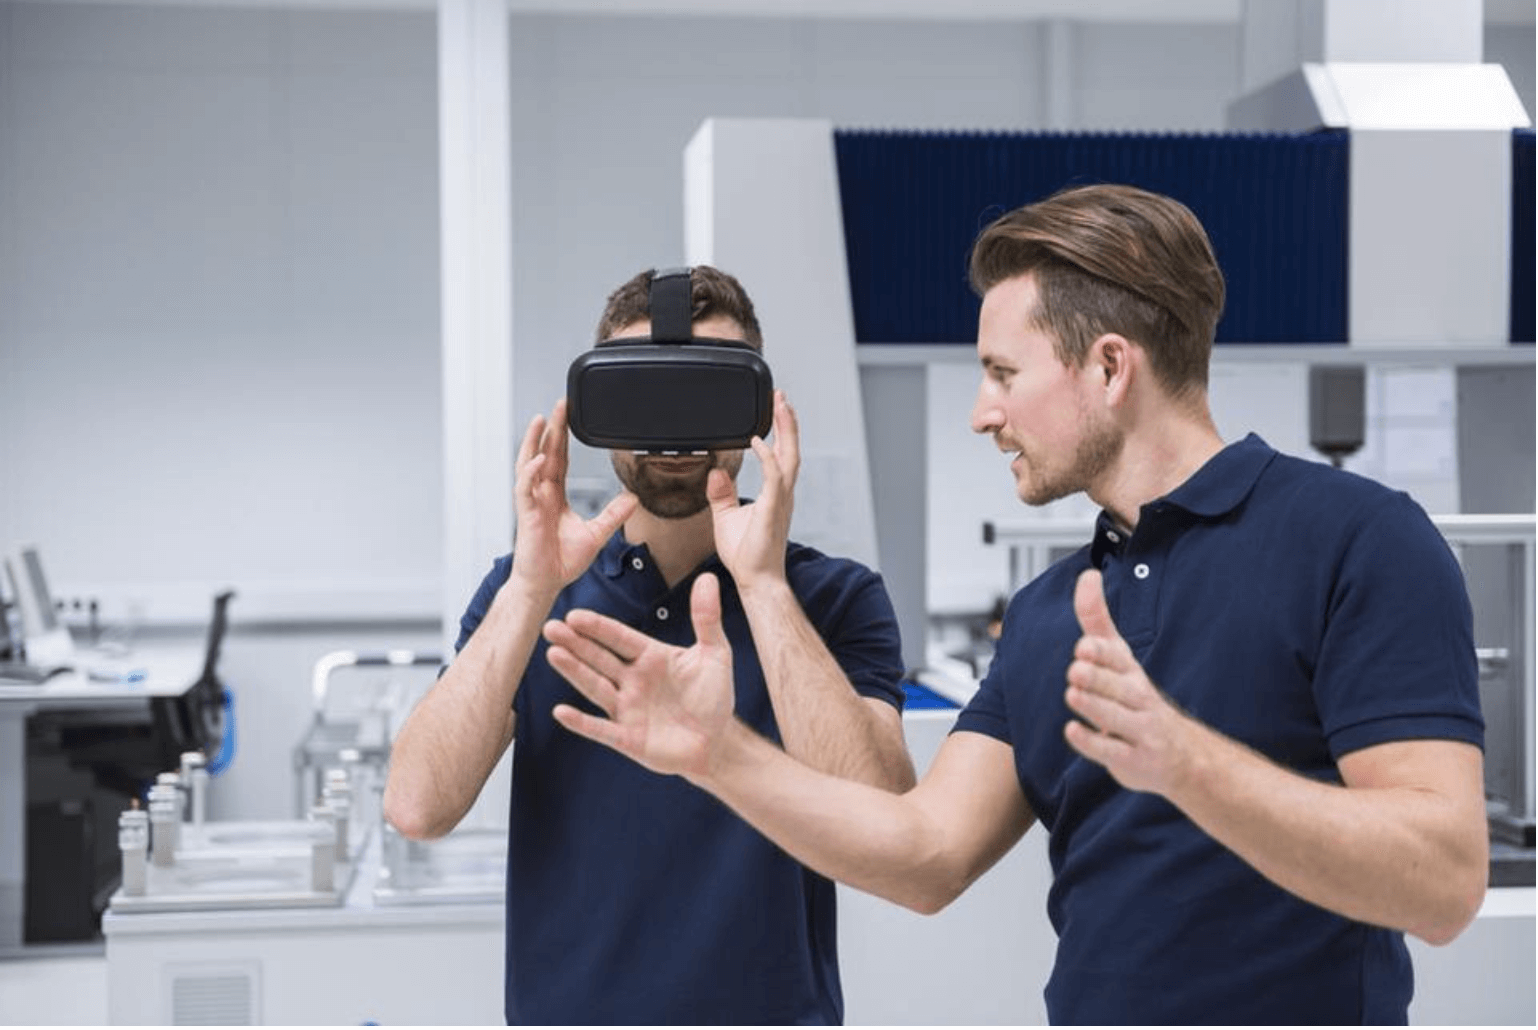 Is Virtual Reality The Future of Corporate Training?